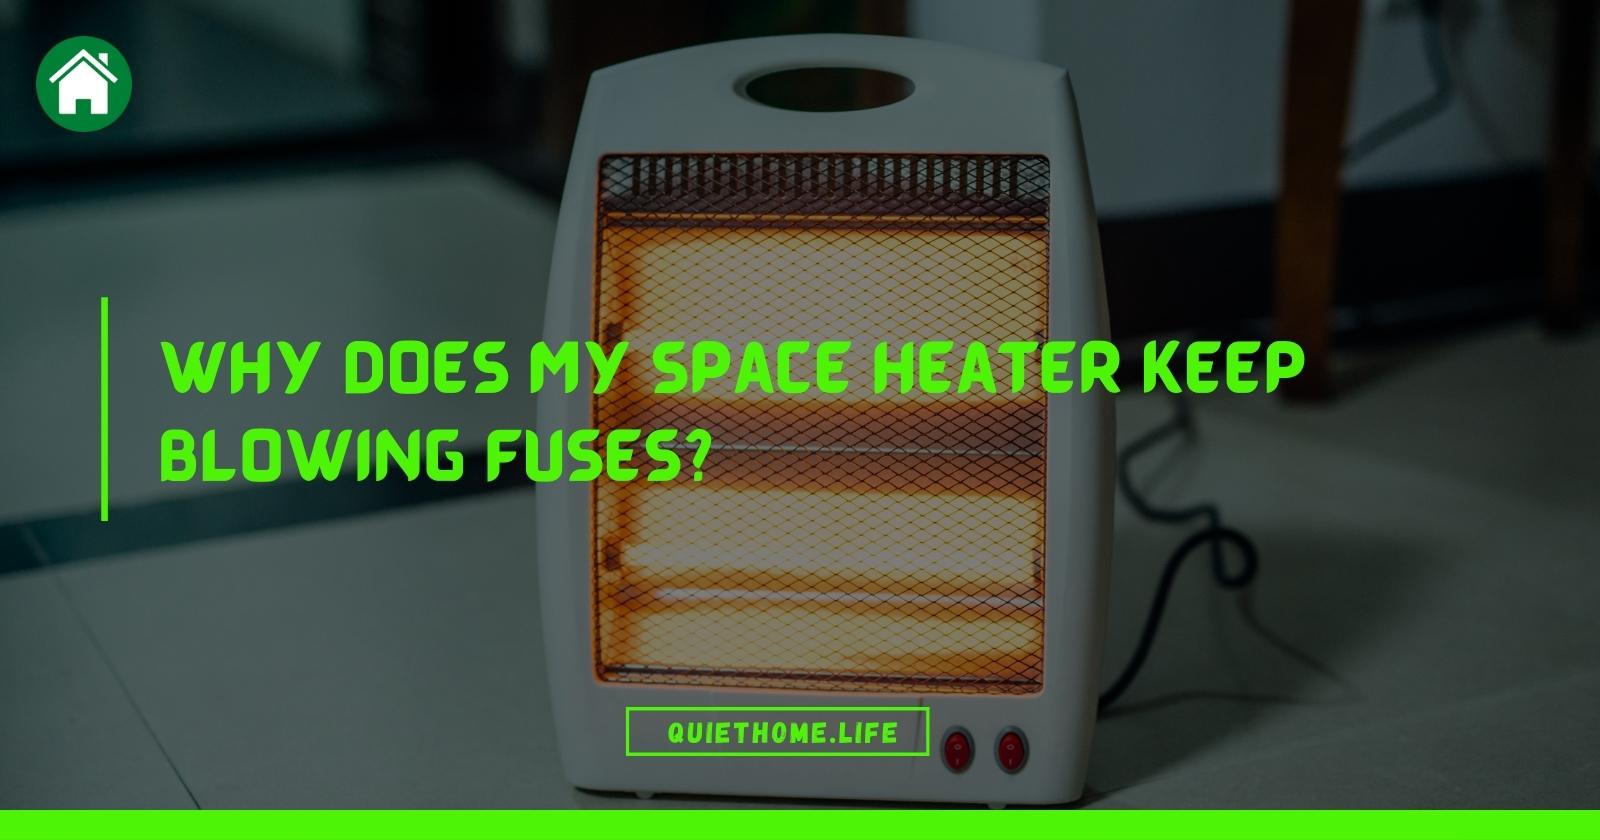 Why Does my Space Heater Keep Blowing Fuses